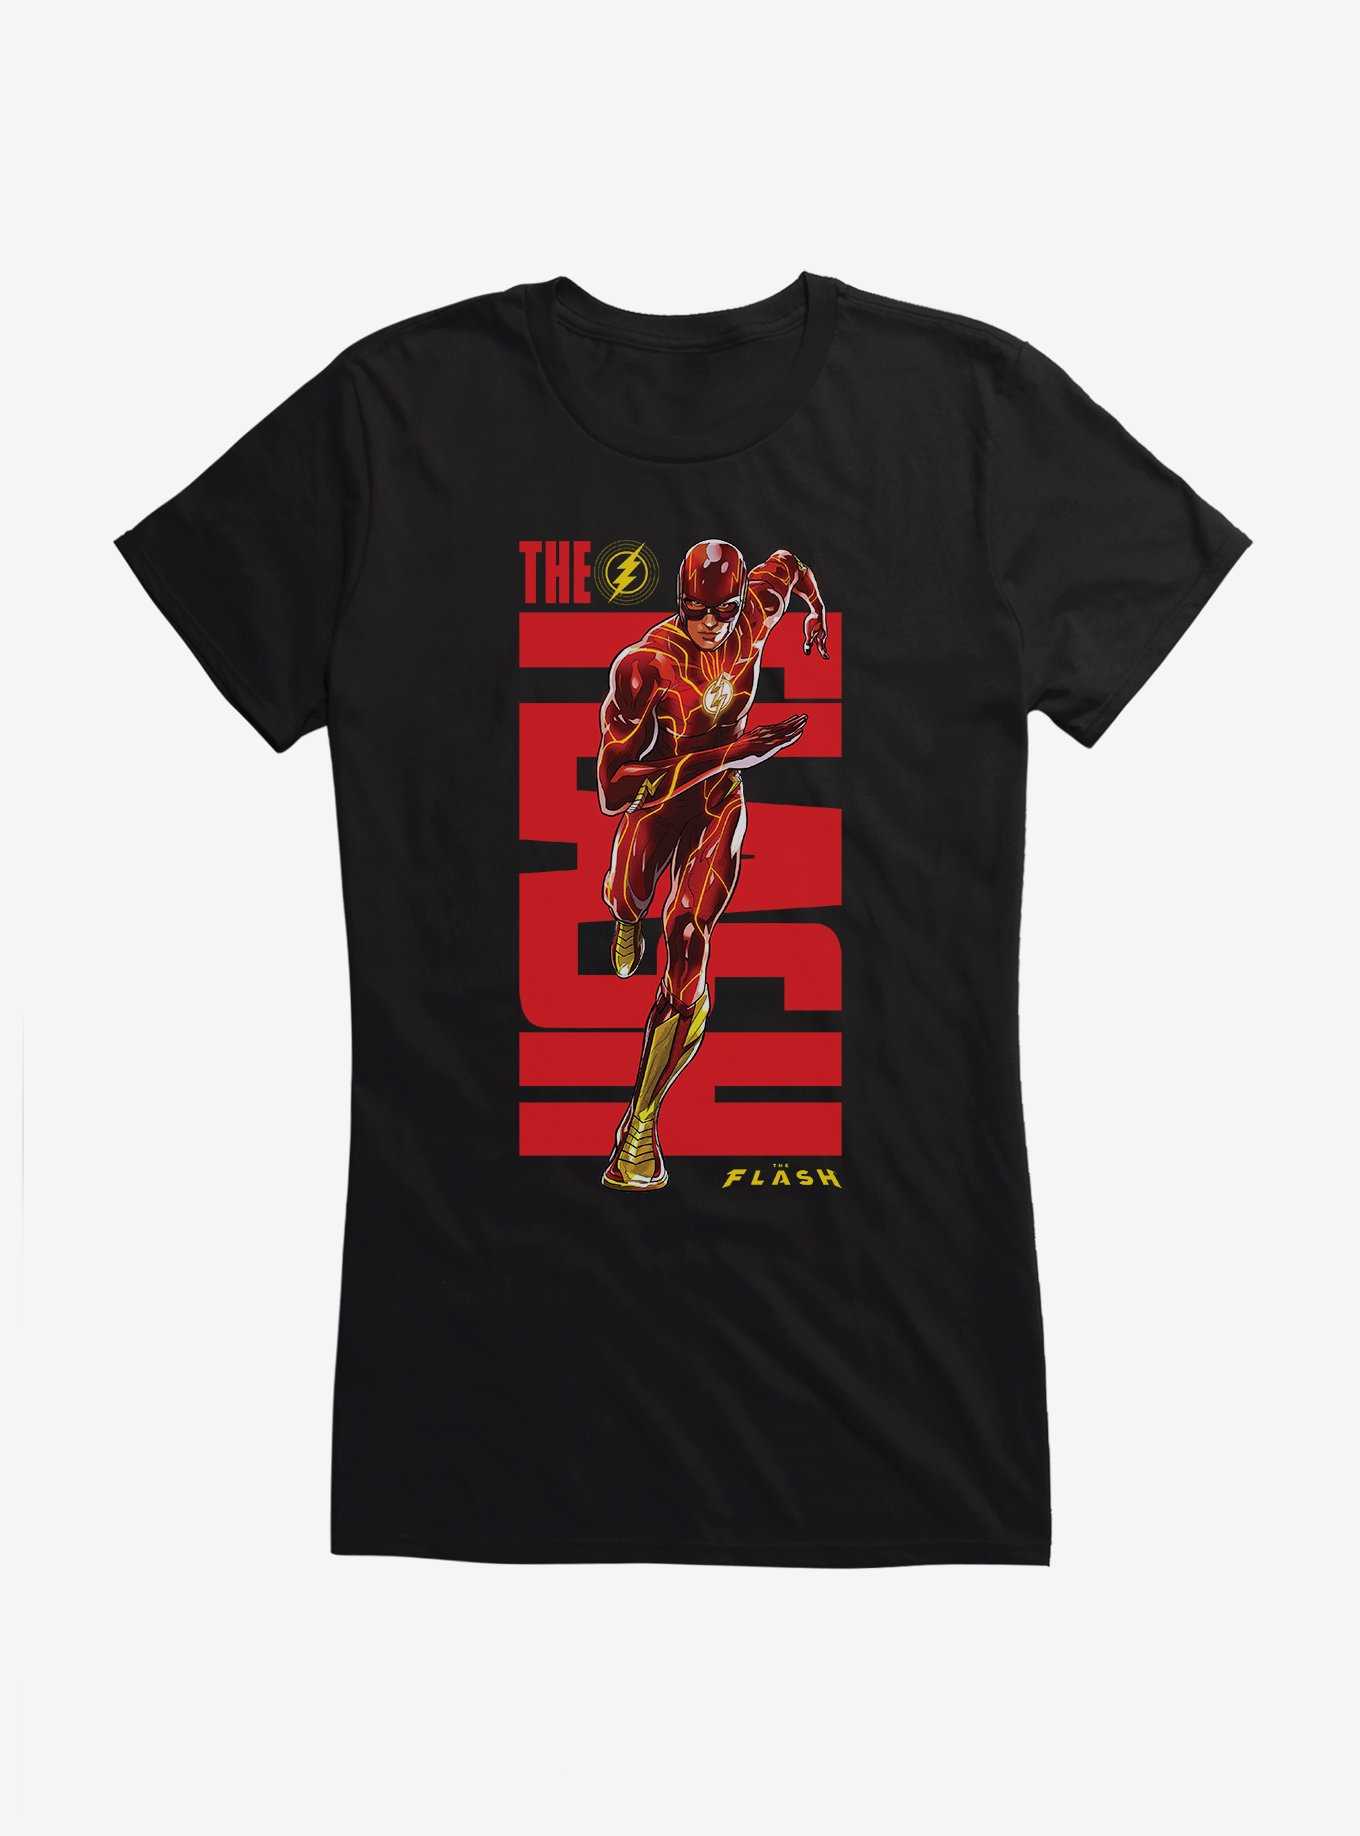 The Flash In Motion Girls T-Shirt, , hi-res